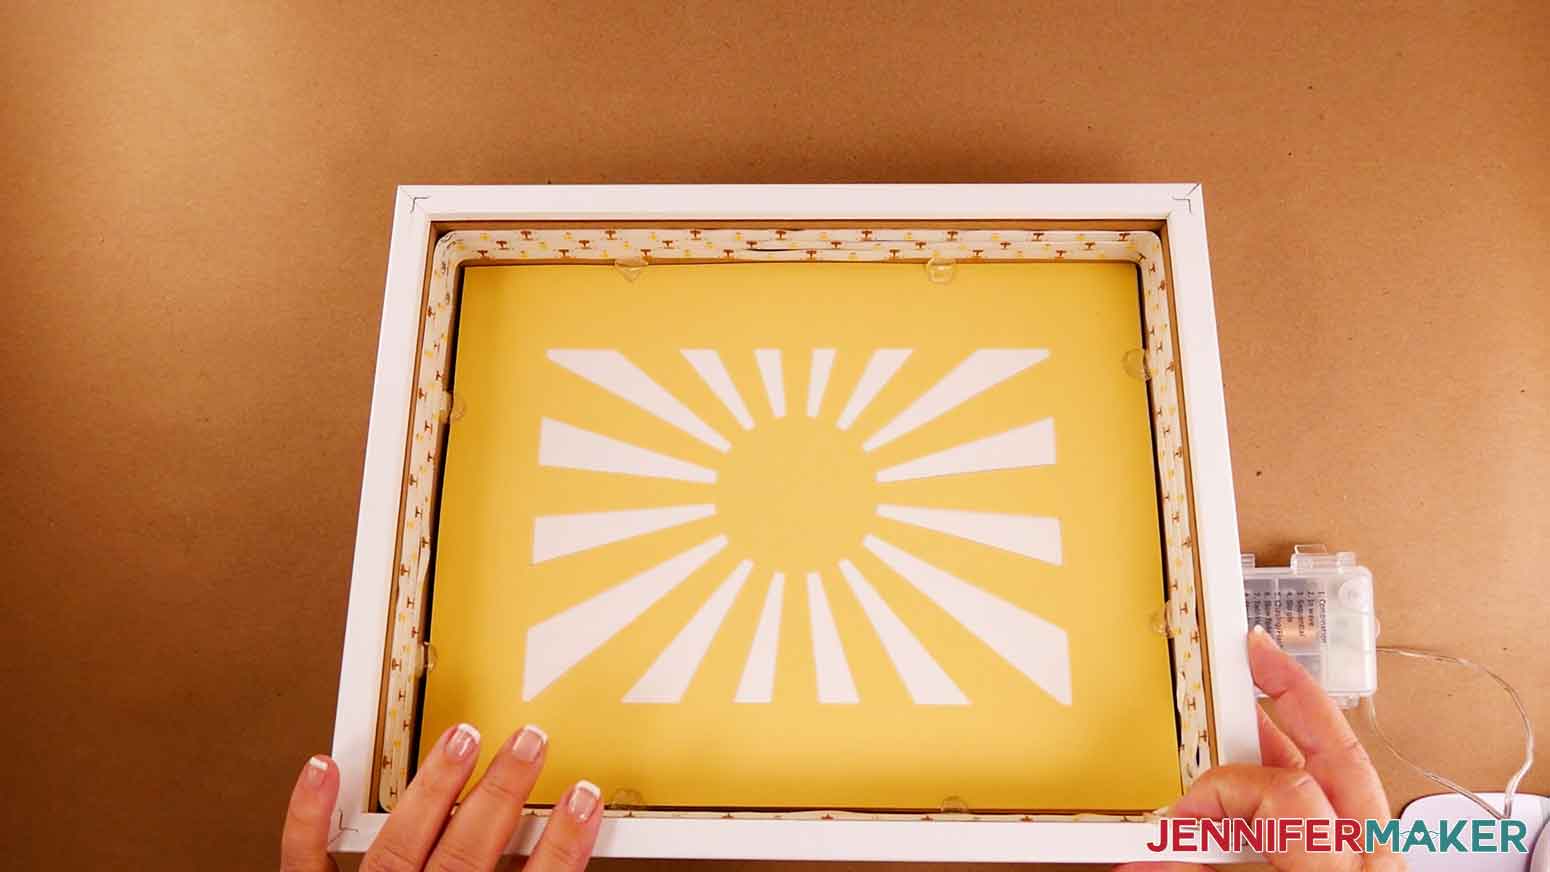 The assembled paper cut light box layers inside the purchased glass shadow box, with glue dots attaching the layer edges to the inside of the frame under the LED strip lights